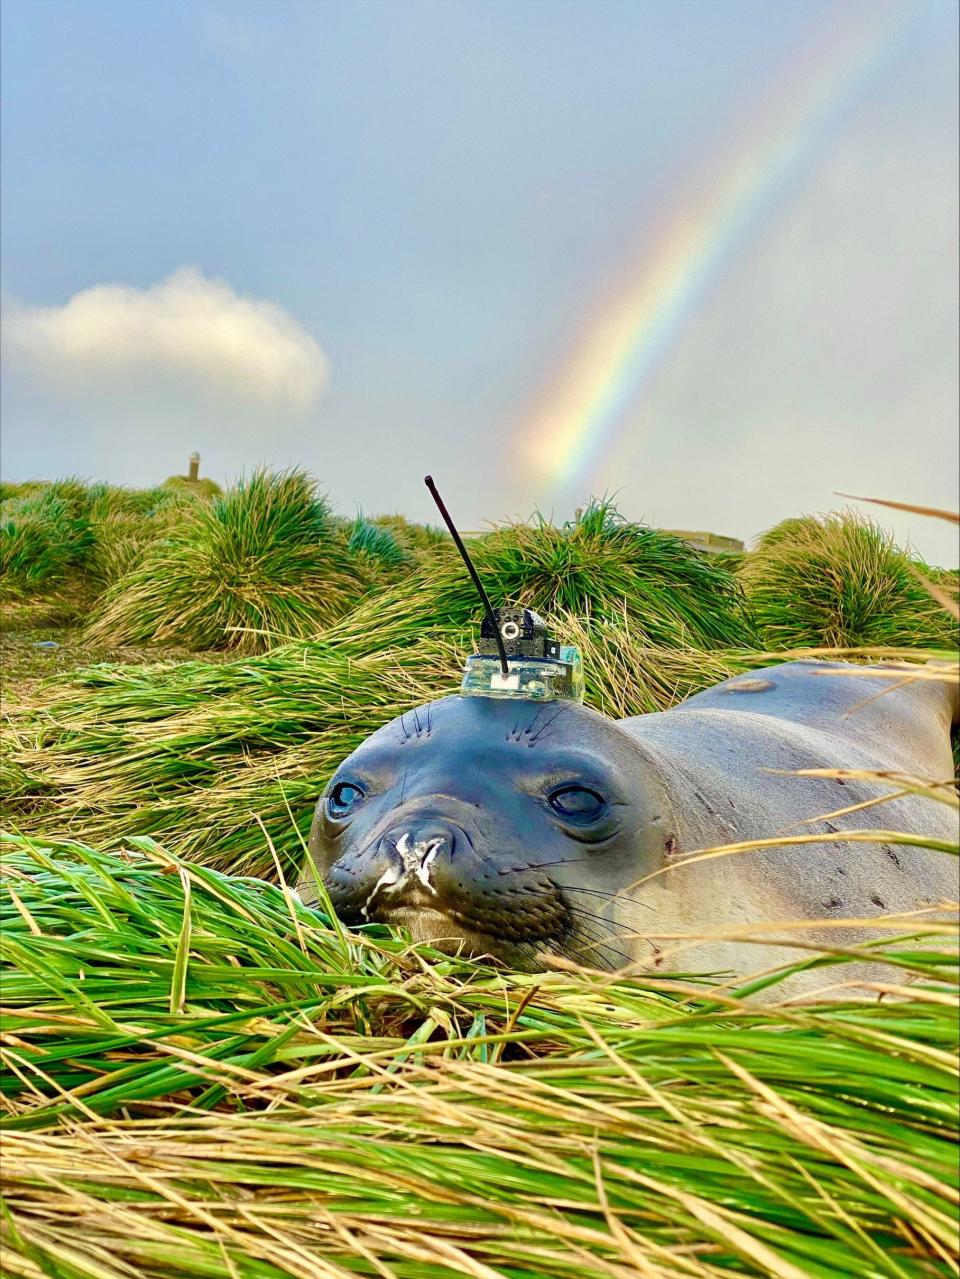 A seal with a tracker adhered to its fur sitting in some grass with a rainbow behind it.